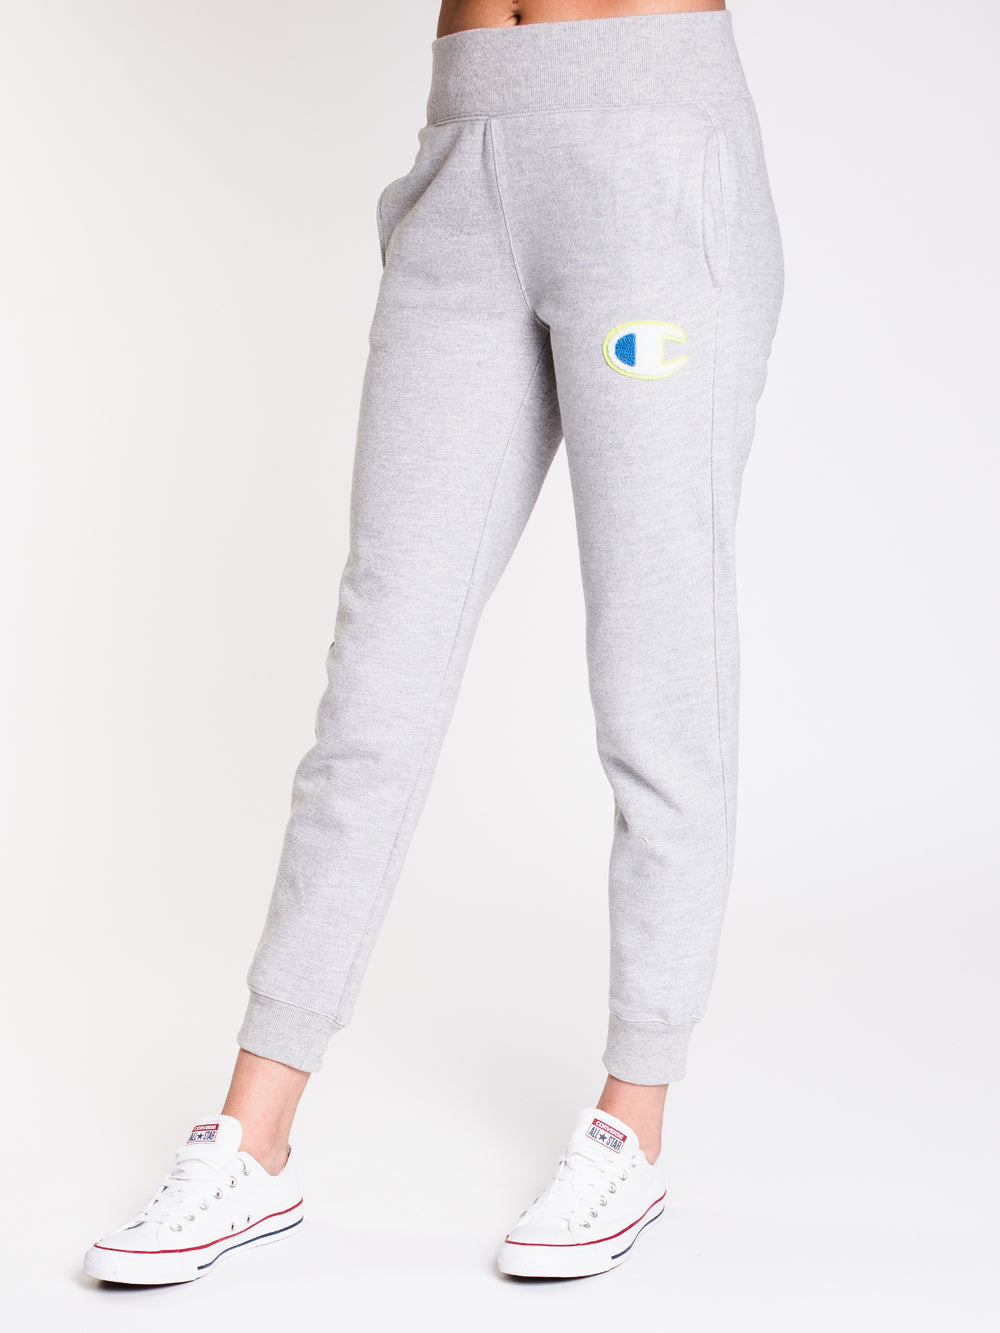 WOMENS REV WEAVE CHNLLE JOGGER - GRY - CLEARANCE